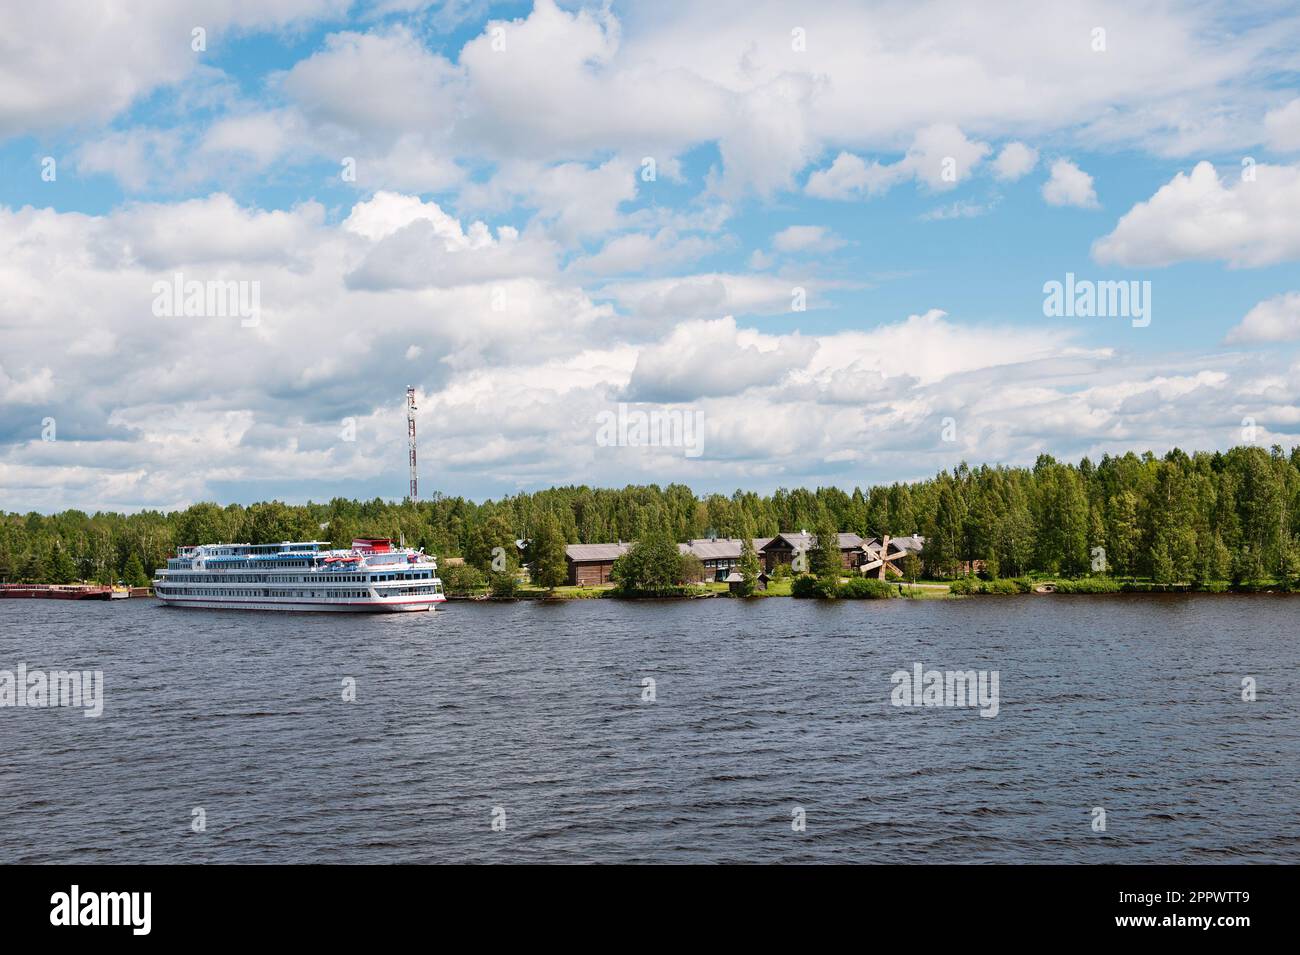 MANDROGI, RUSSIA - JUNE 8, 2015: Karelia region, old wooden houses on the banks of the Svir River. Restored ancient village, the berth of tourist ship Stock Photo